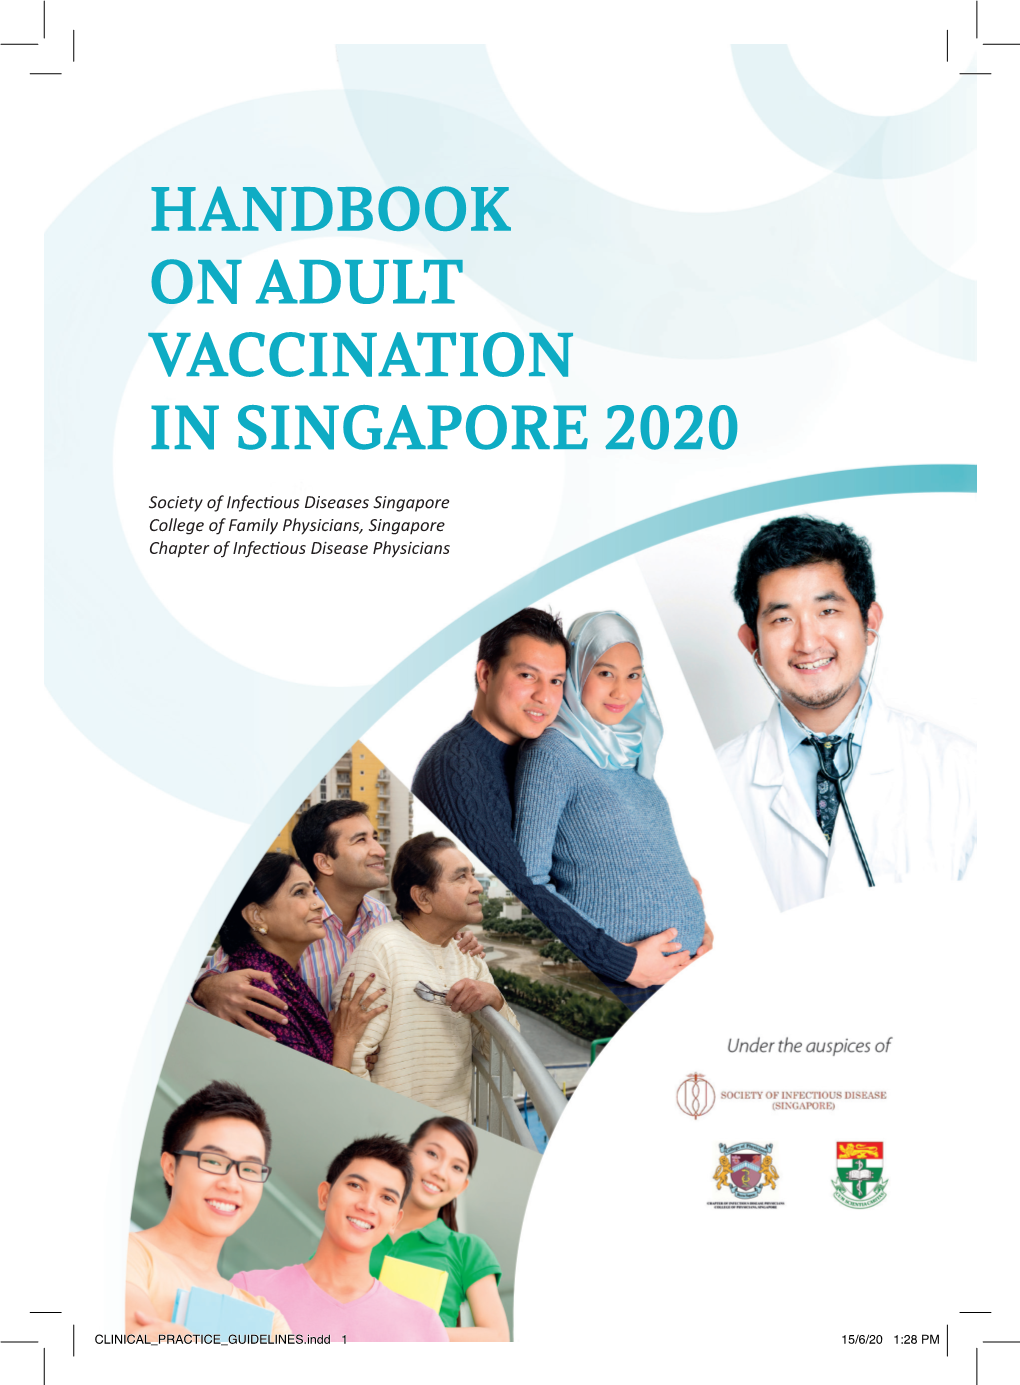 Handbook on Adult Vaccination in Singapore 2020